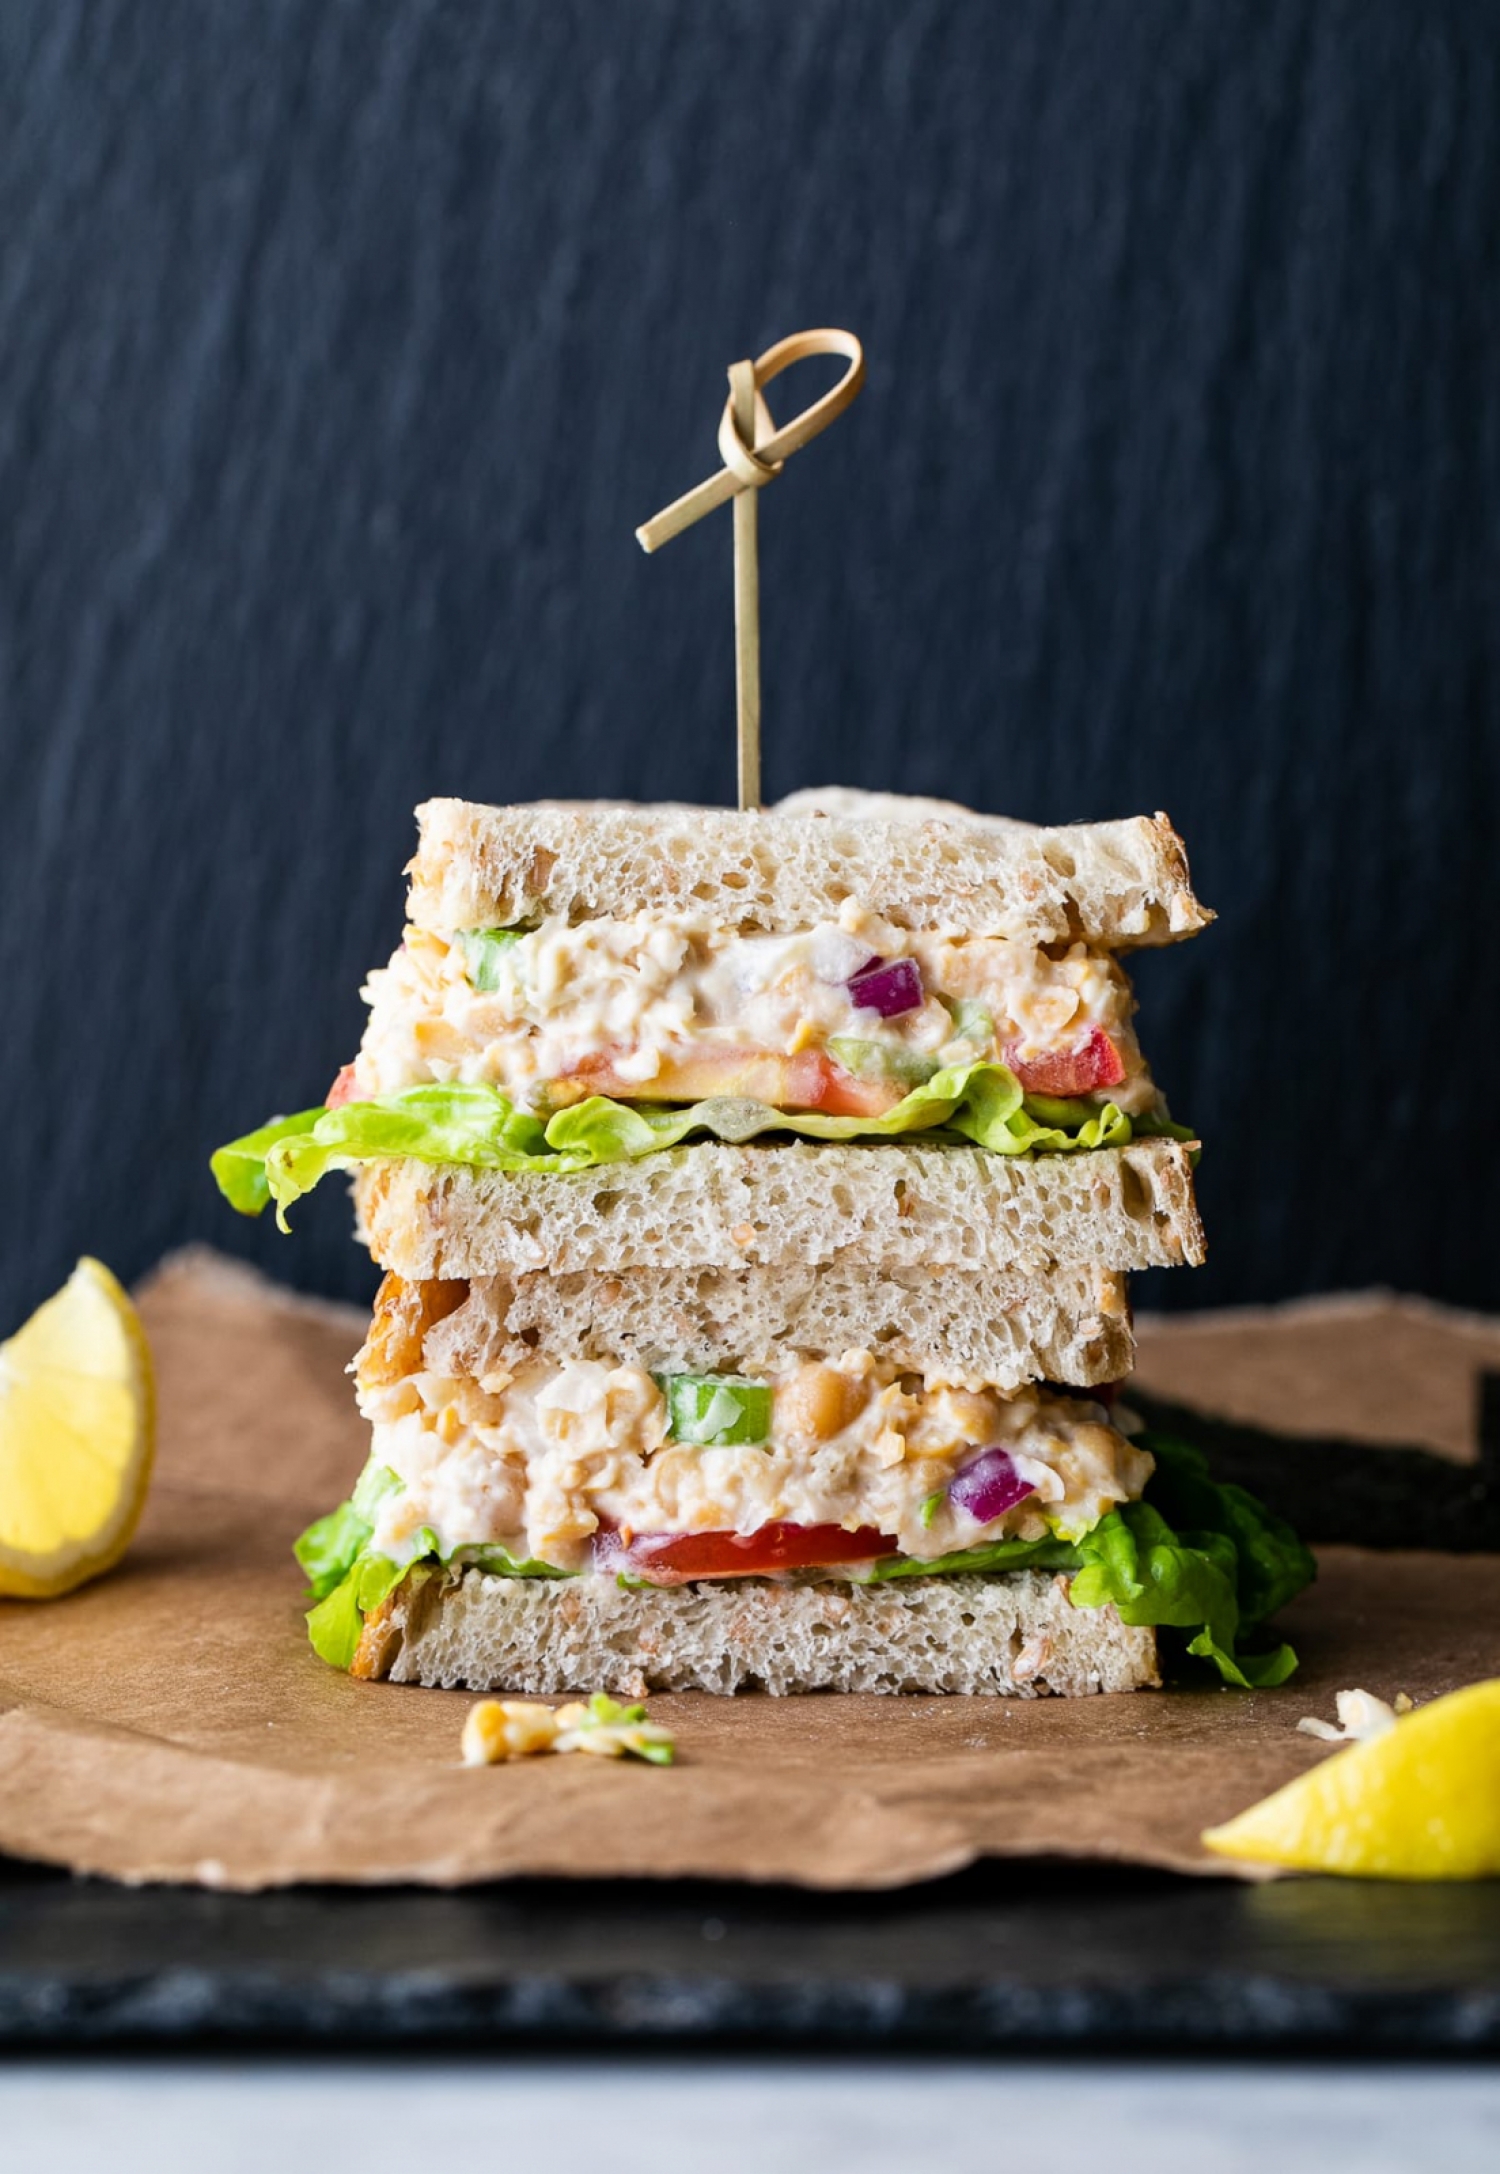 <p>This sneaky dish is disguised as a tuna sandwich—yet it's 100% vegan. With classic garnishes and creaminess, it boasts all the texture and flavors of your regular tuna-mayo combo. <a href="https://simple-veganista.com/chickpea-of-sea-salad-sandwic/" rel="noopener">Get the recipe here.</a></p>